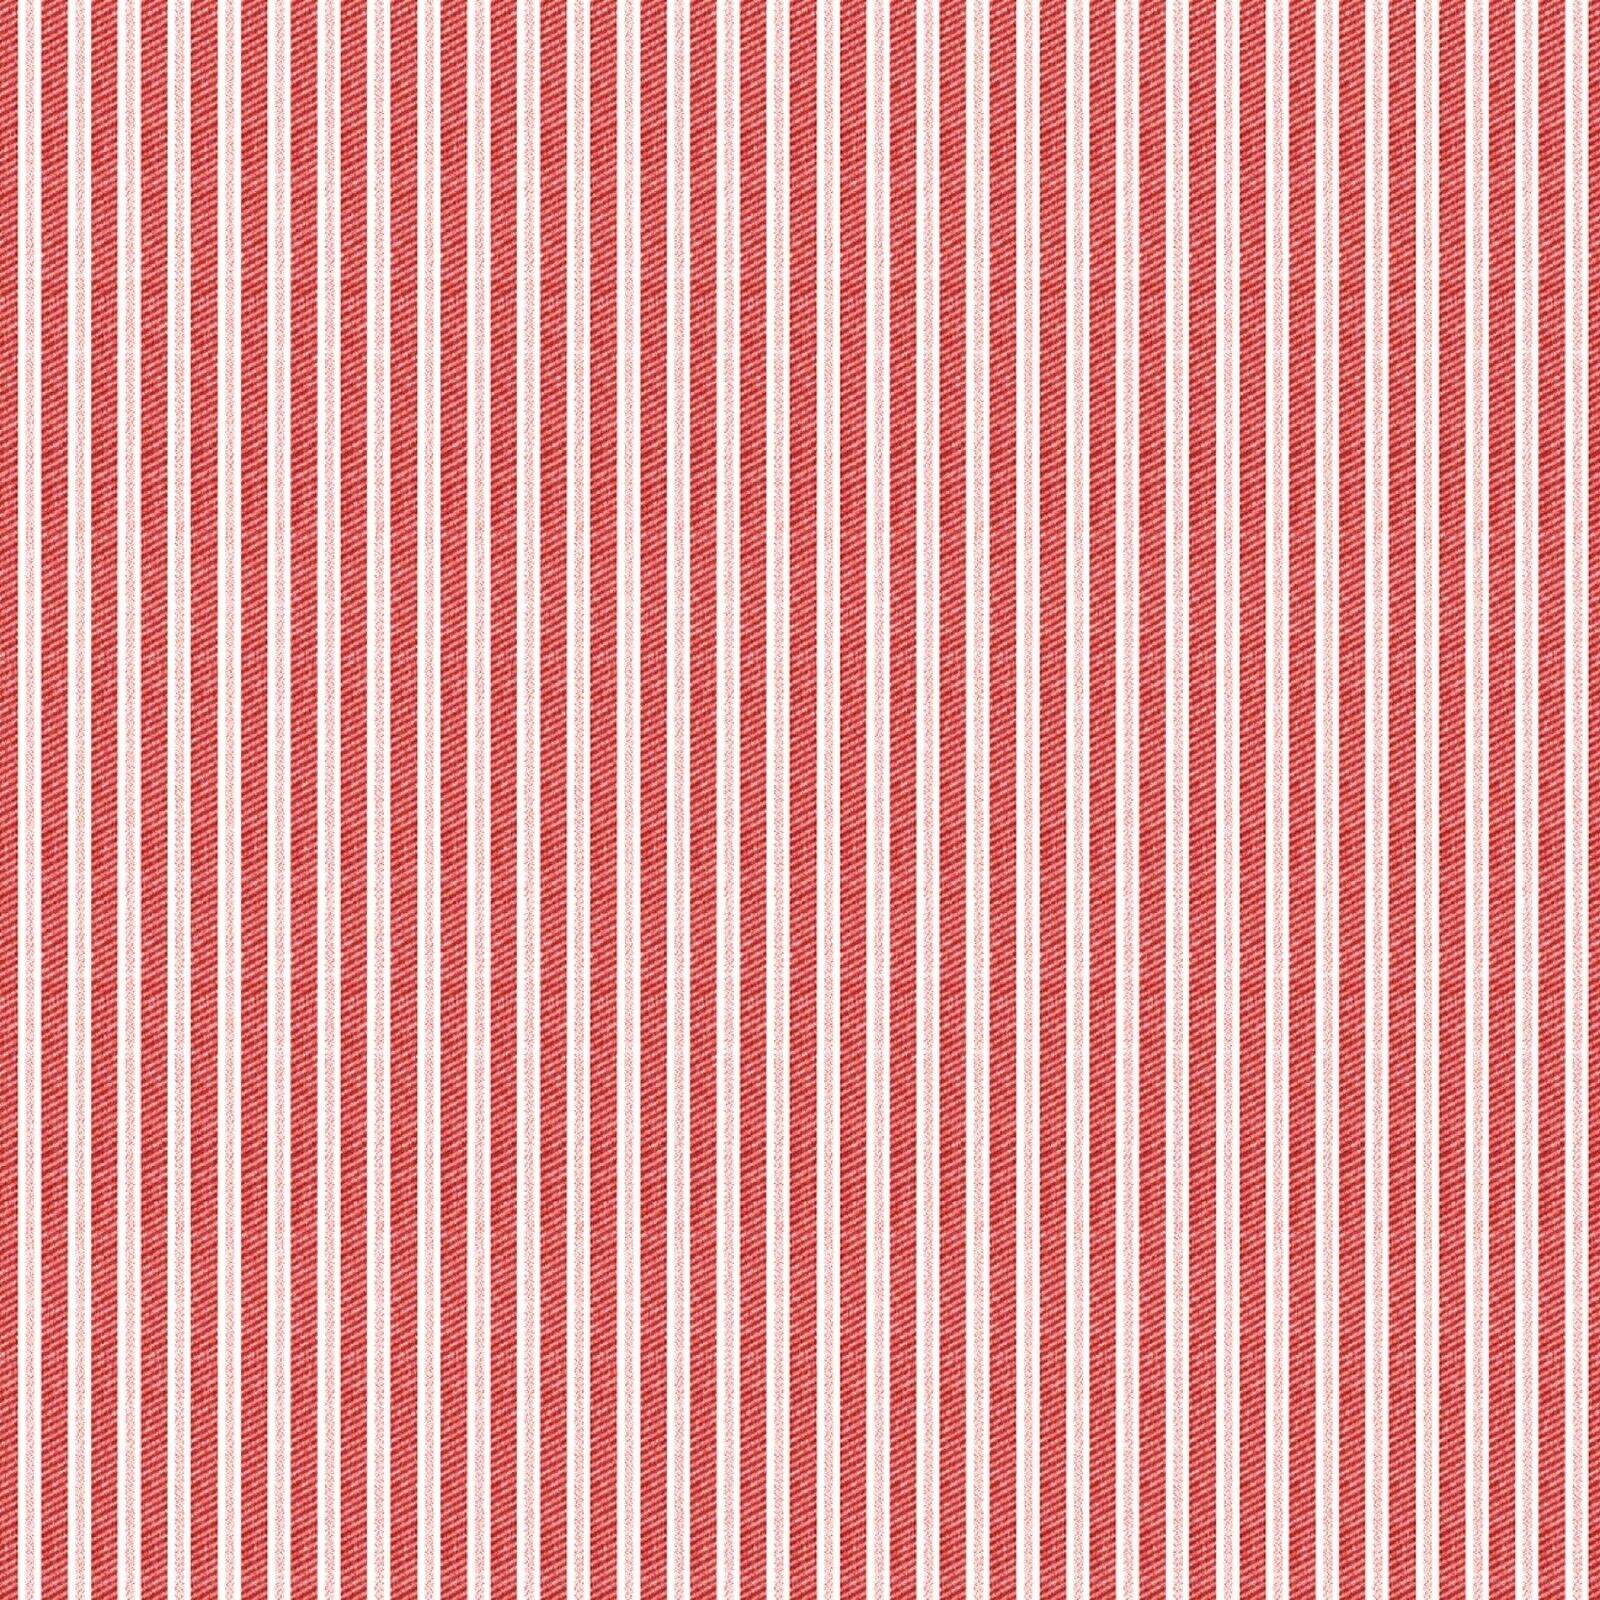 Farmhouse Country Stripe by Springs Creative Cotton Fabric 21145